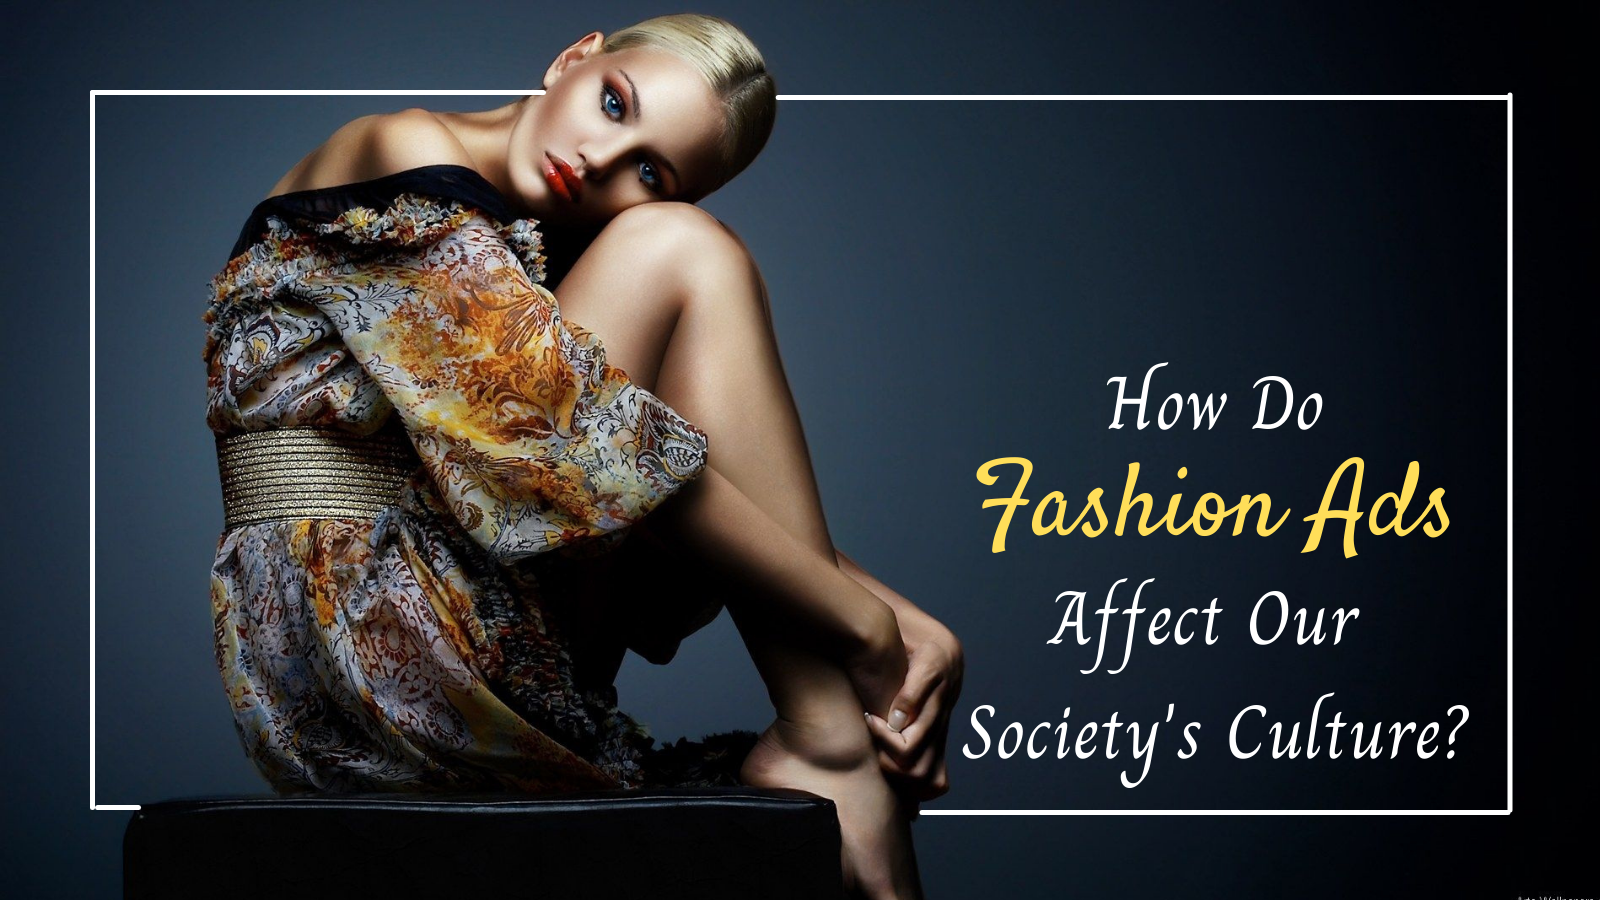 How Do Fashion Ads Affect Our Society’s Culture?